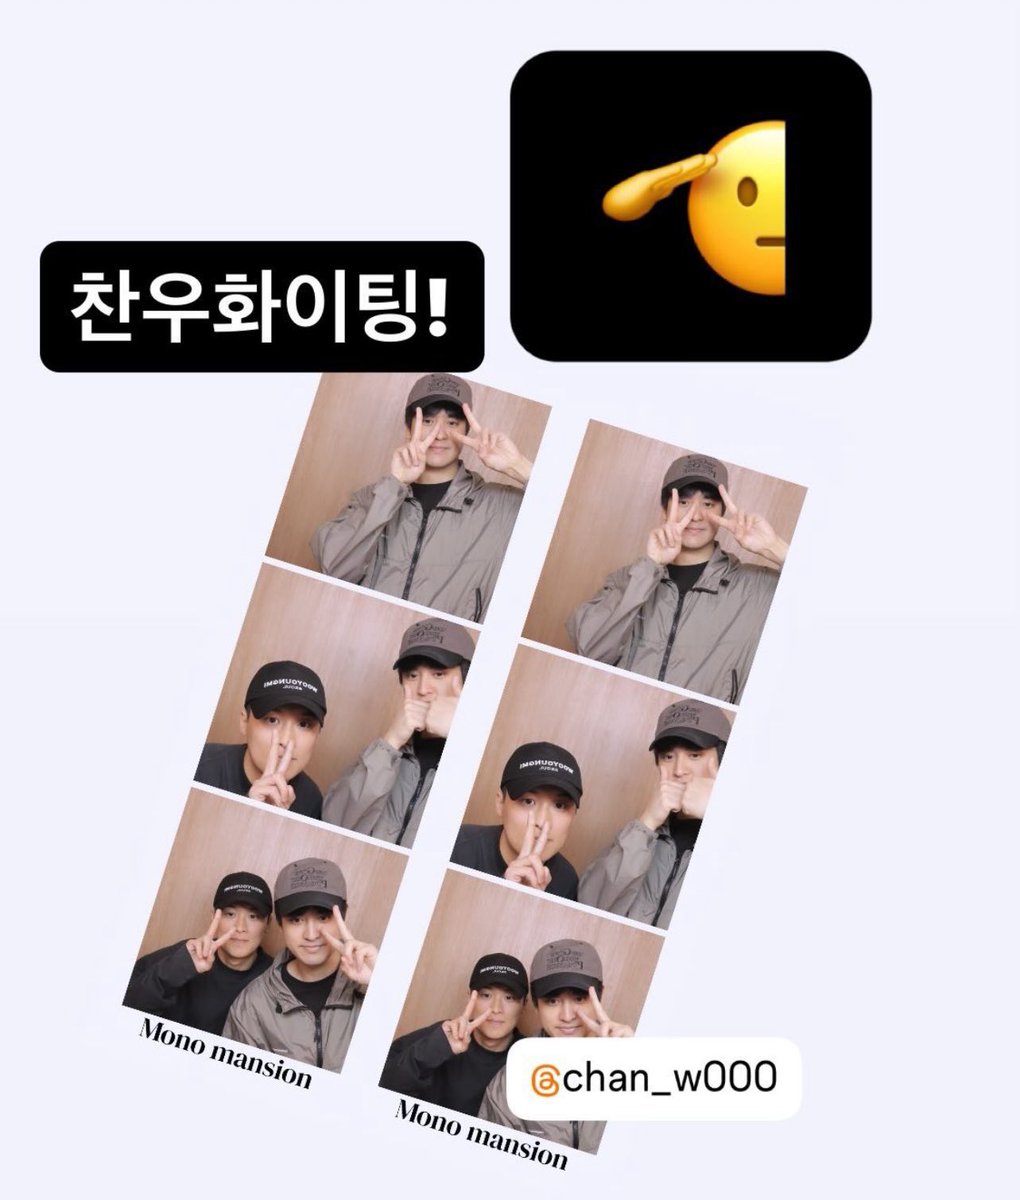 Chanwoo’s friend(s) are sending him off now 🥺🥺🥺